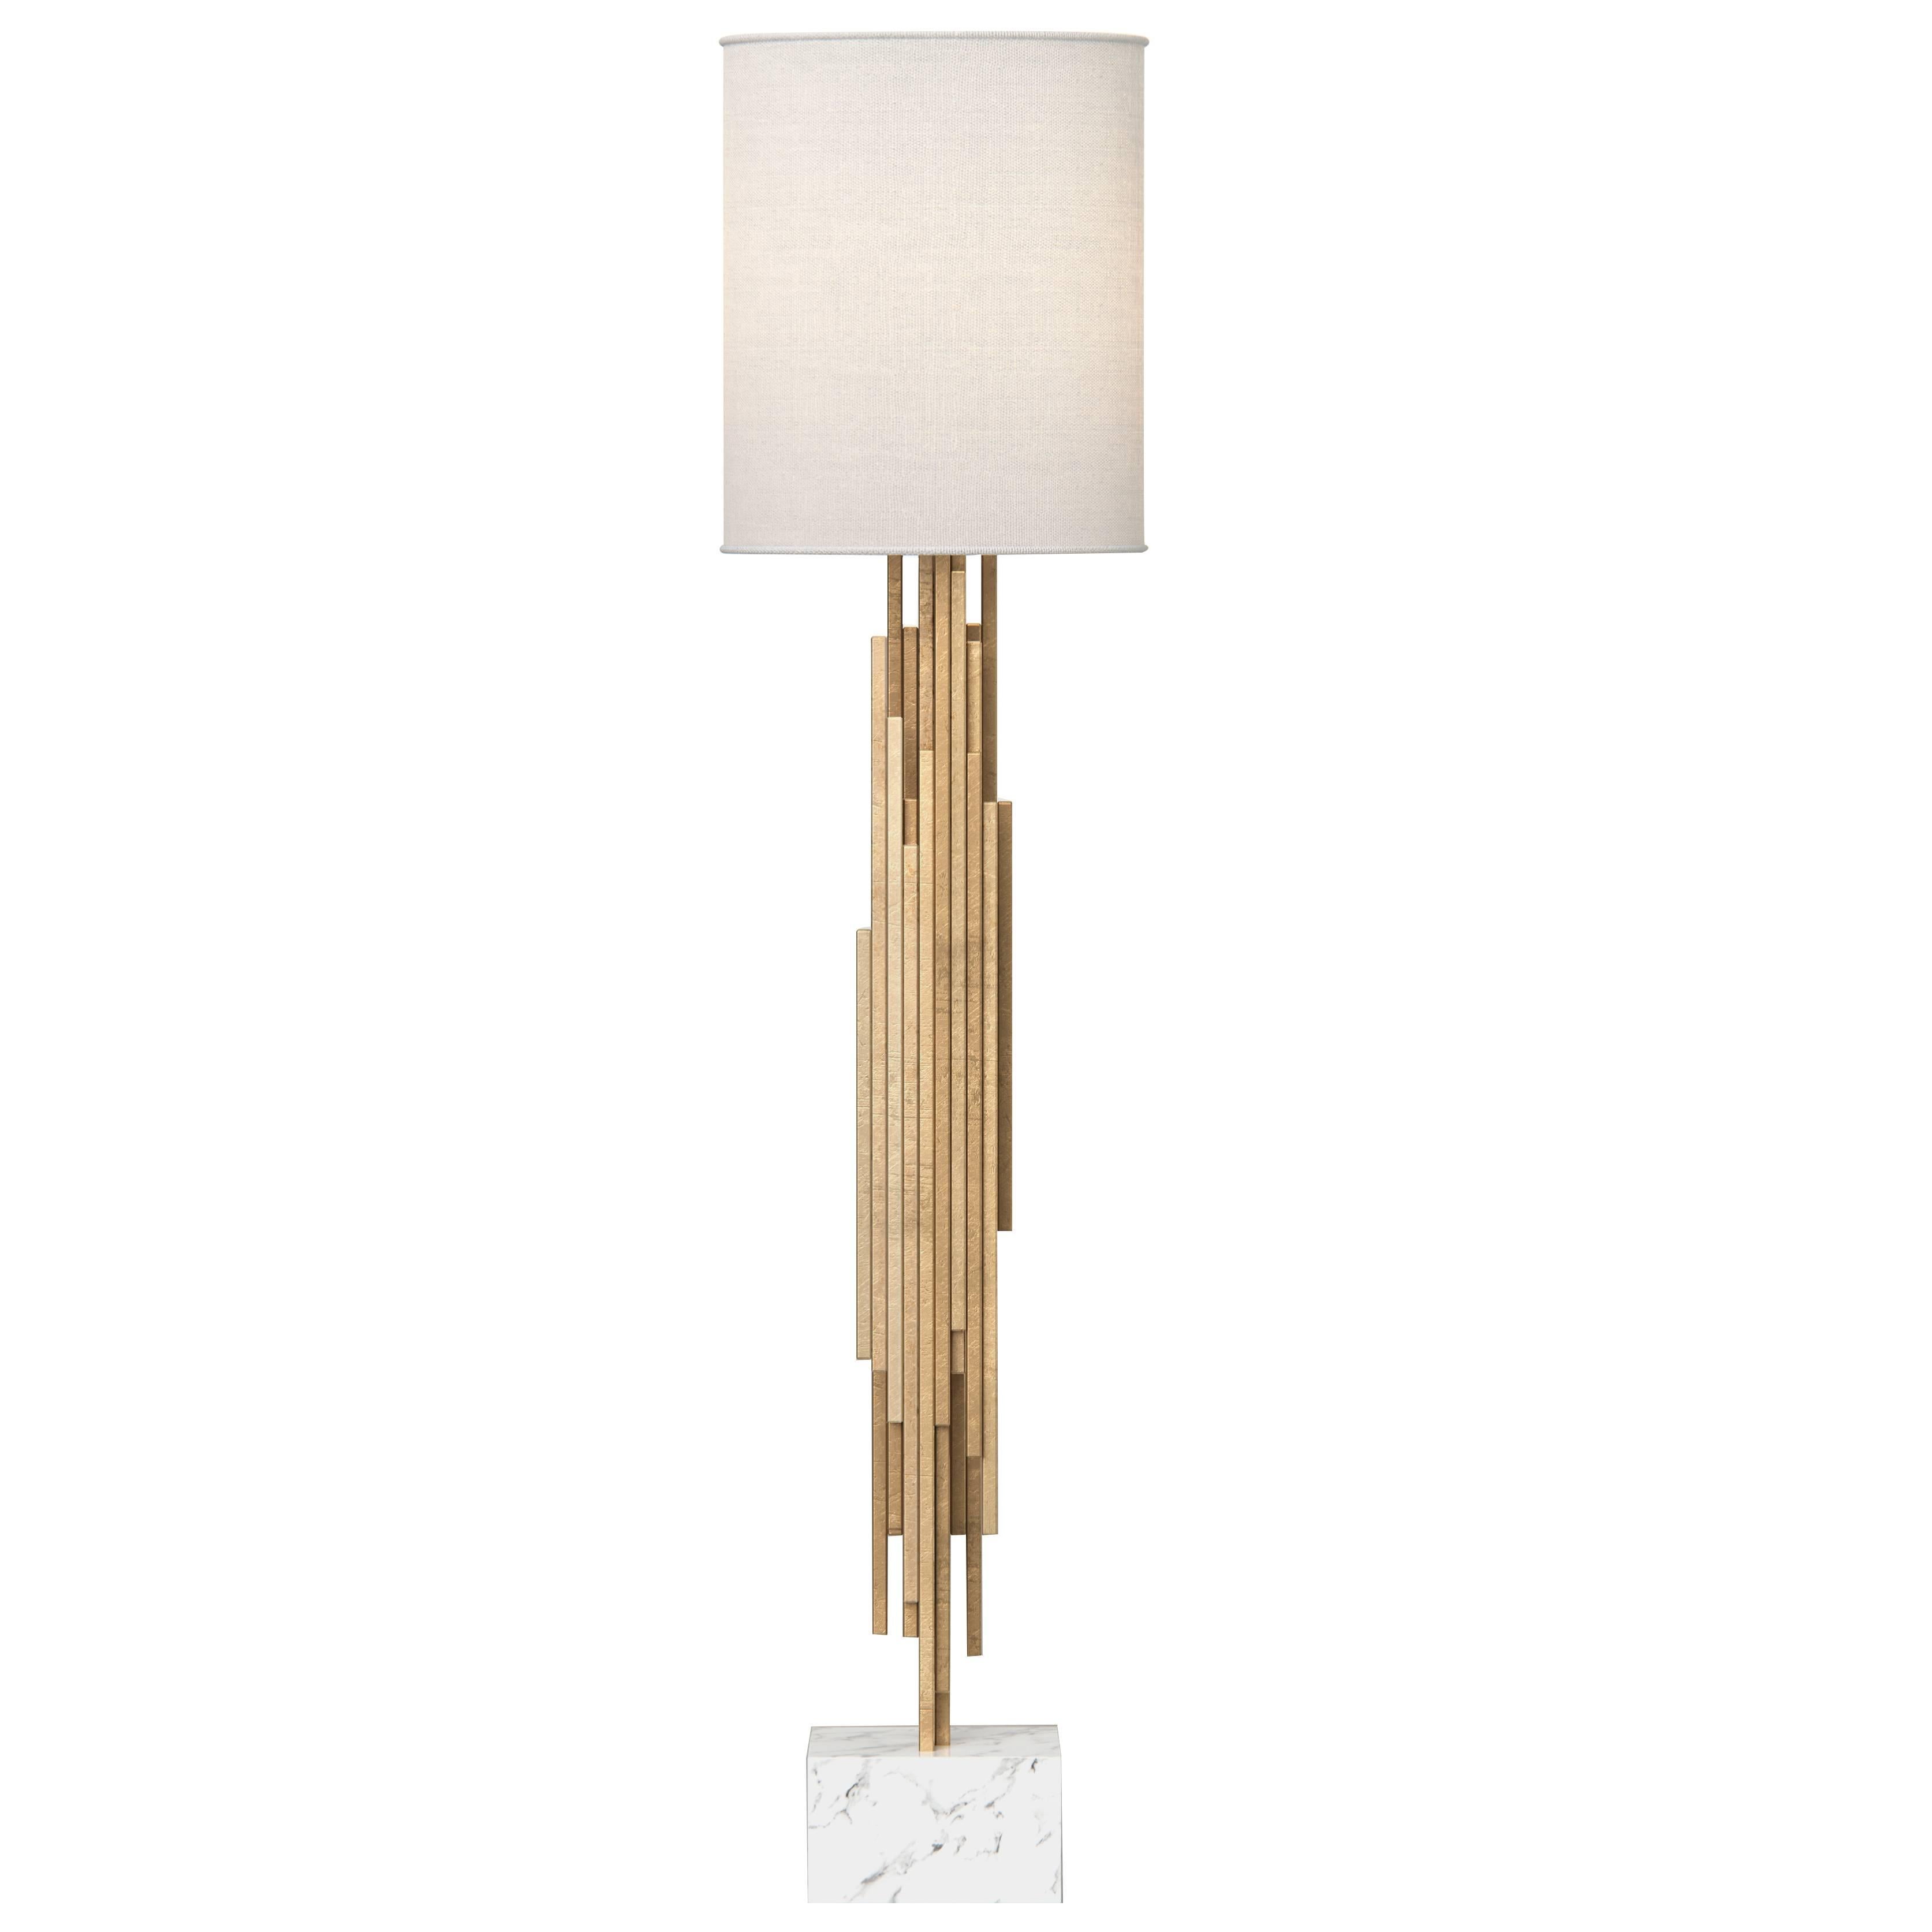 The Ambroise Floor Lamp is a stunning and elegant lighting fixture that is sure to add a touch of luxury to any room. Crafted with gold-leafed wood, this floor lamp features a sculptural design that is both beautiful and unique. The use of natural